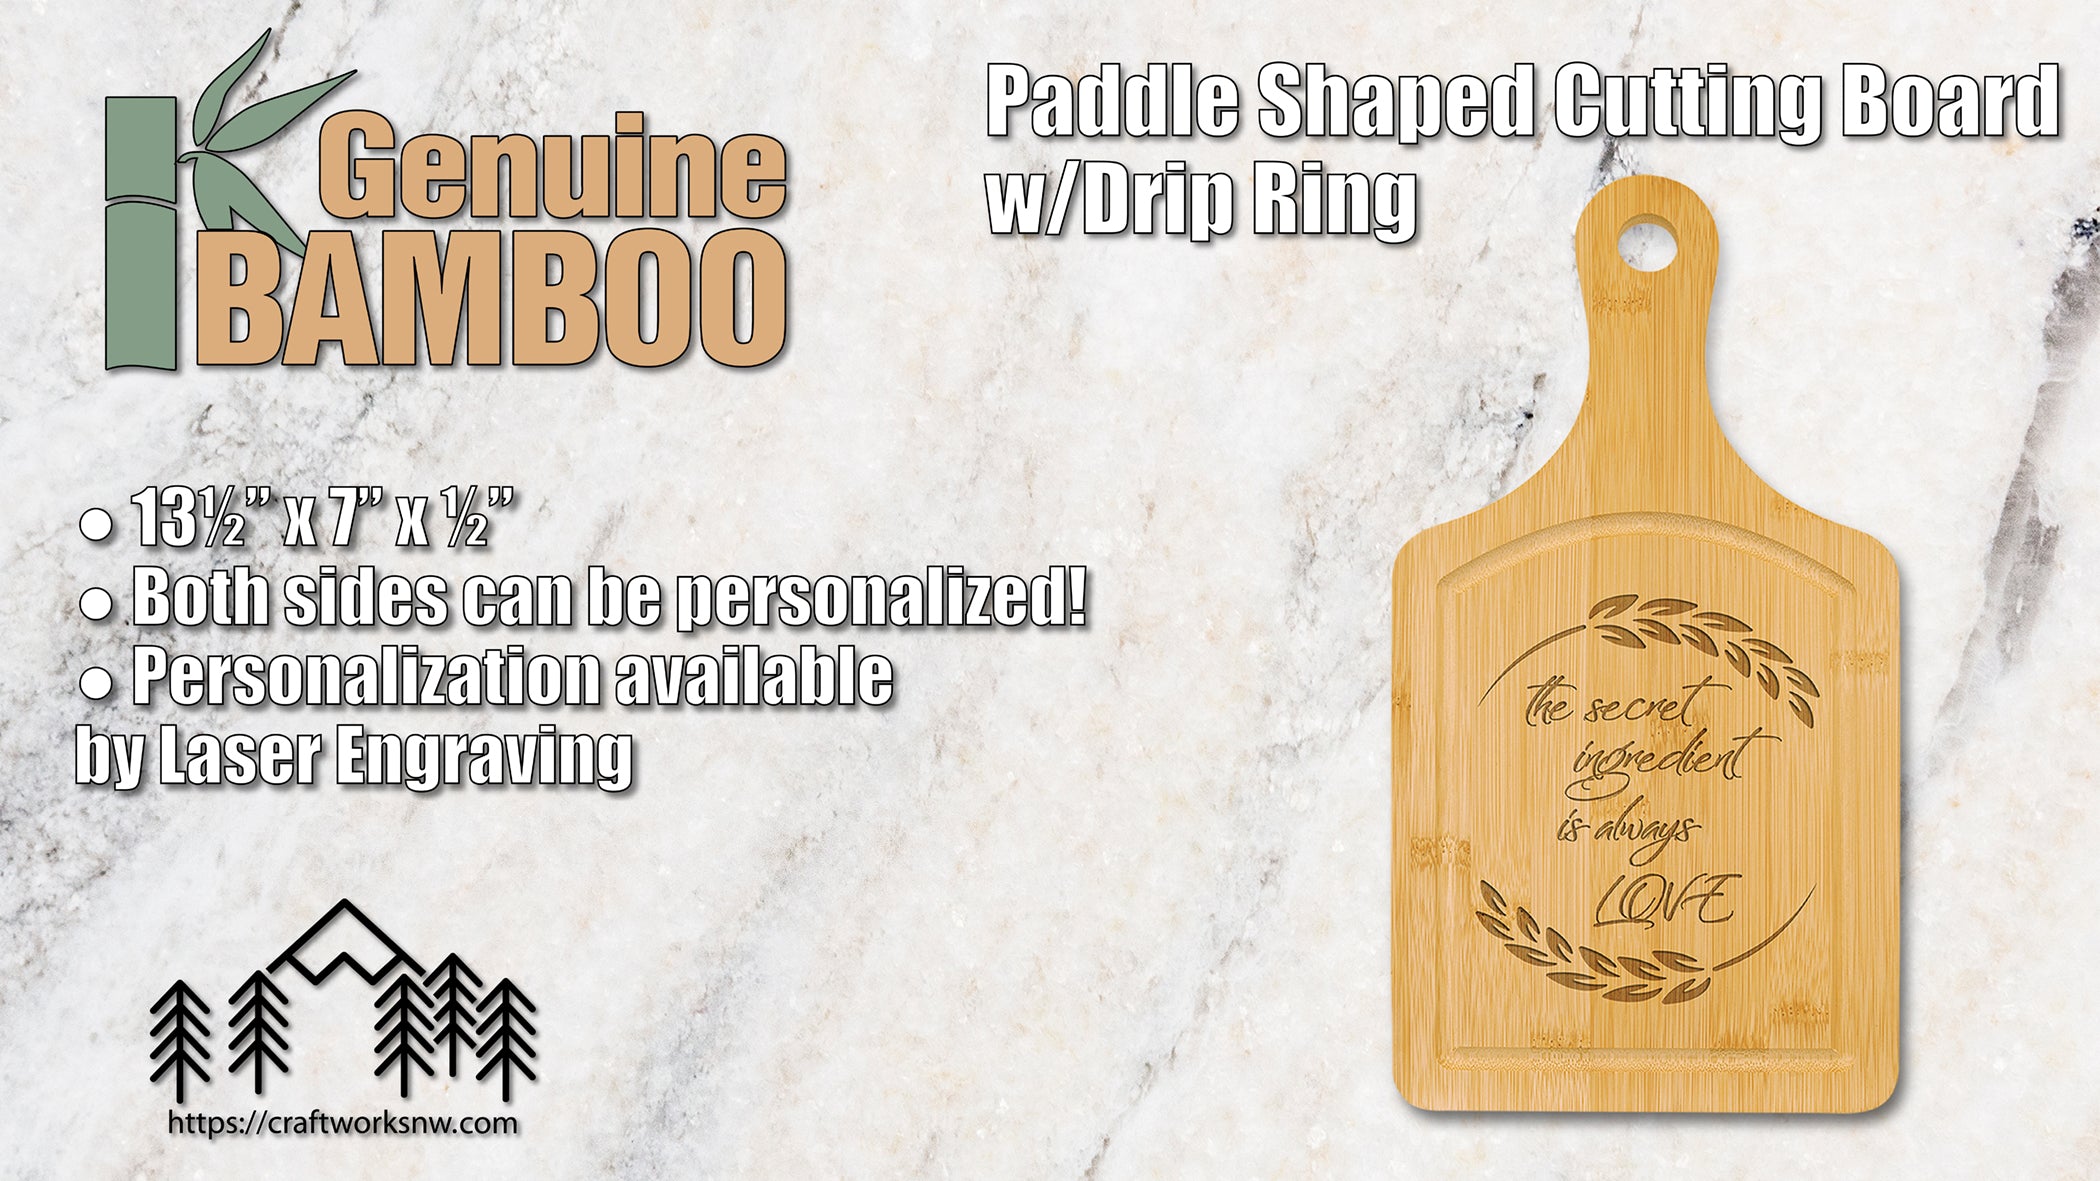 Bamboo Cutting Board - Paddle Style with Drip Ring - Western Heritage  Company, Inc